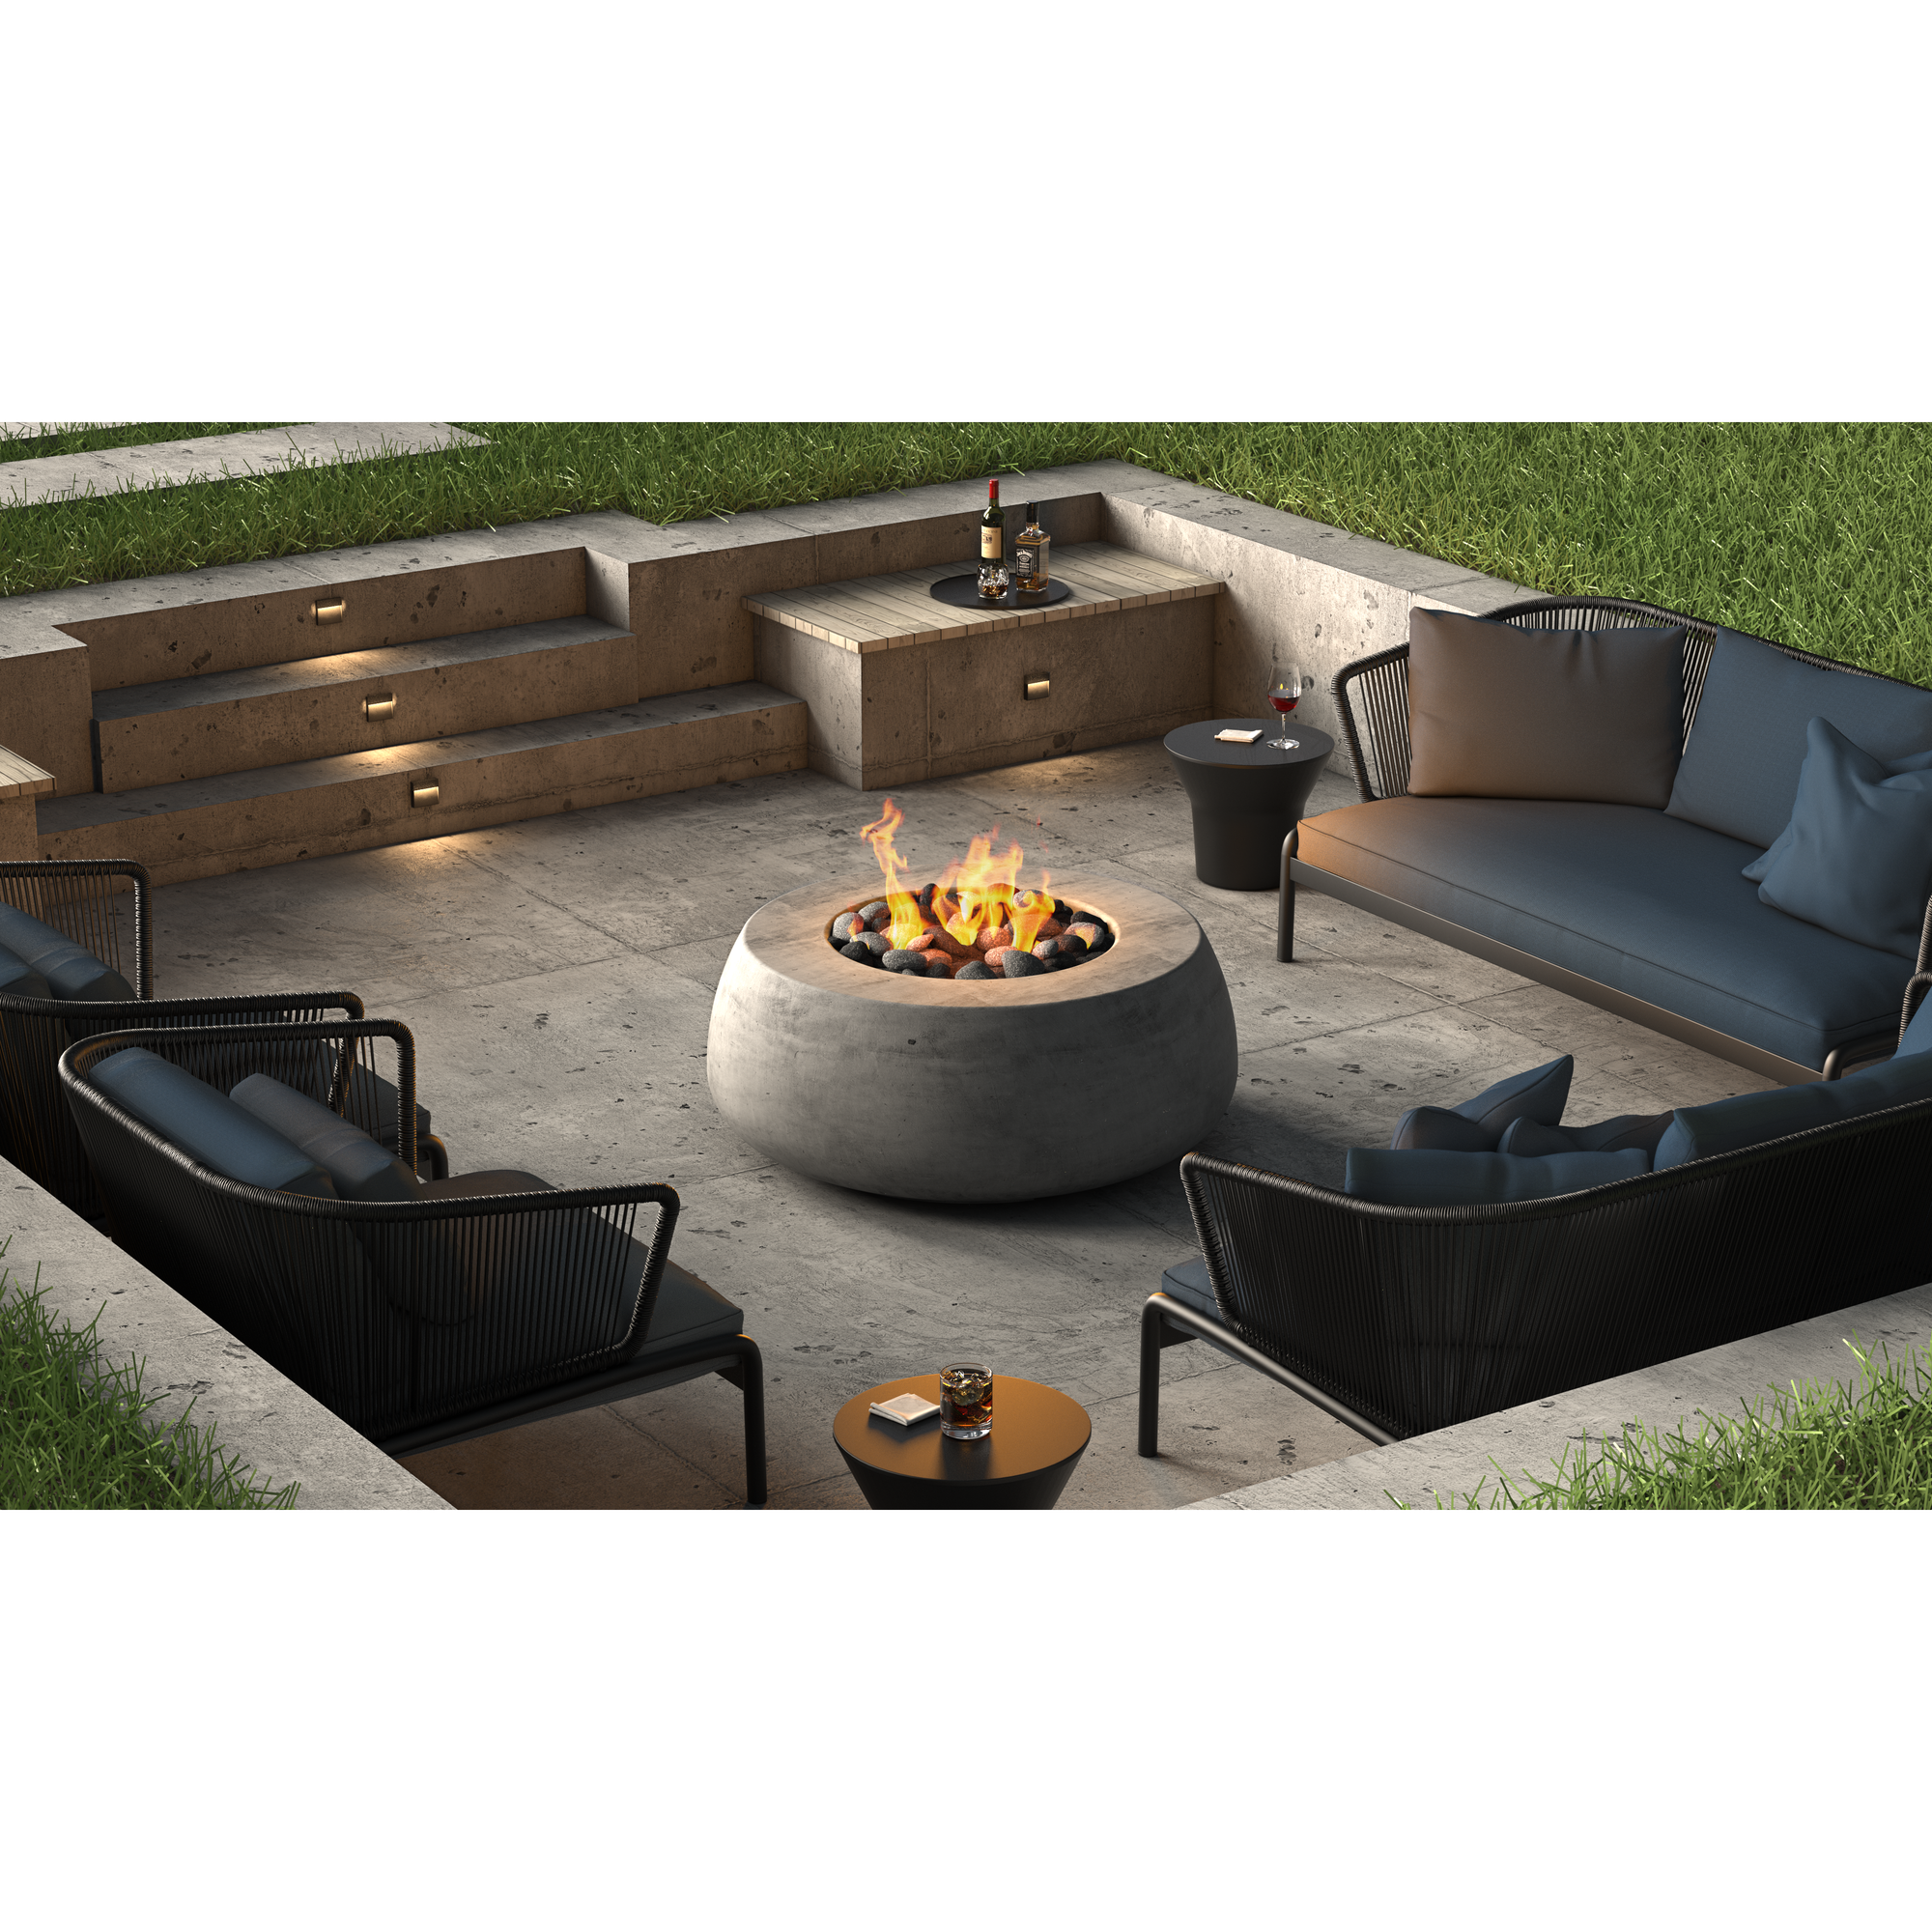 Dune Fire Table in GFRC Concrete by Prism Hardscapes - Majestic Fountains